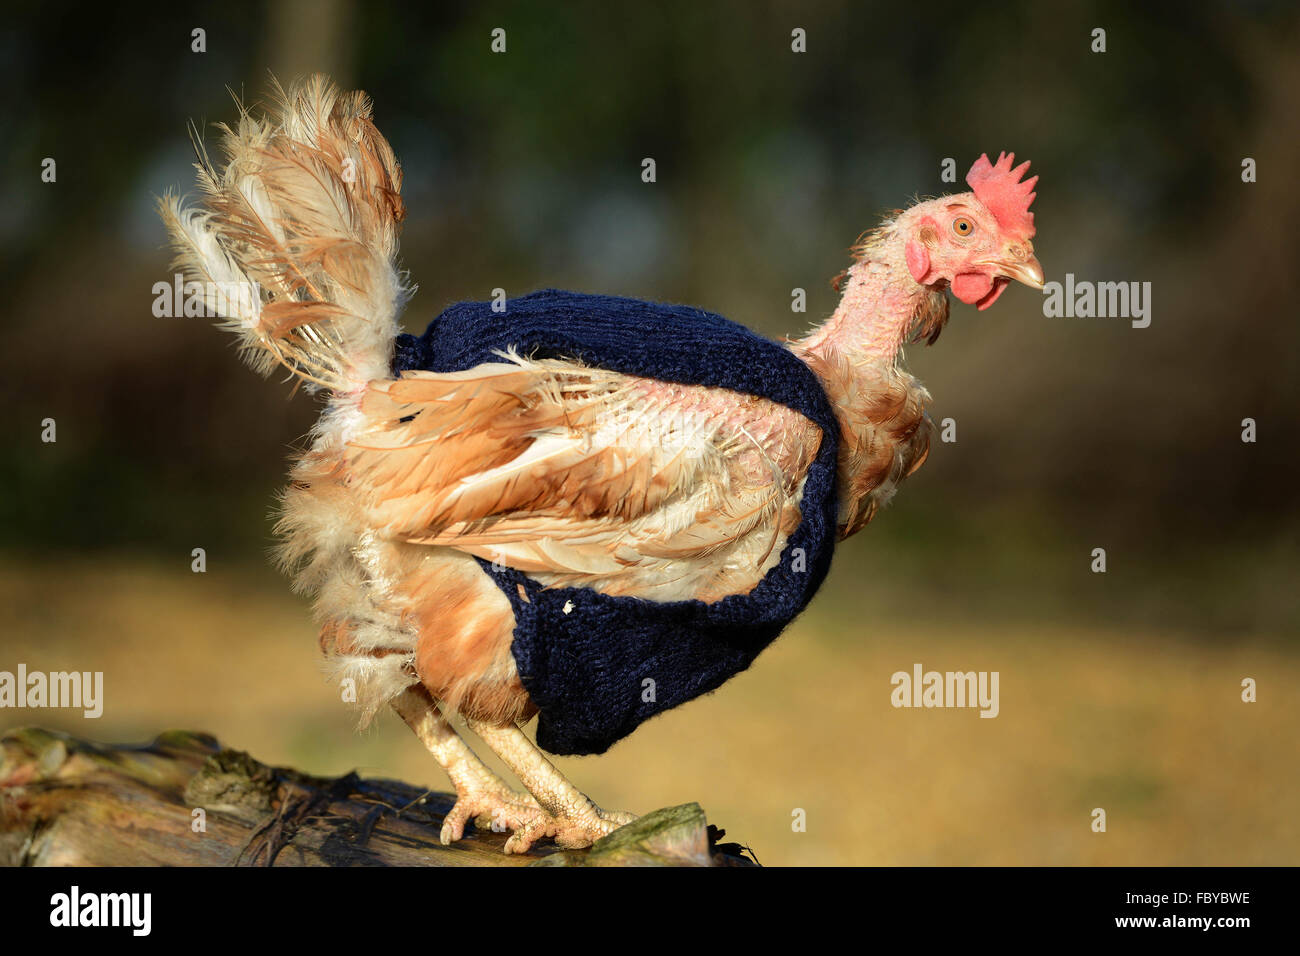 Ex battery hens with knitted woollen jumpers Stock Photo - Alamy